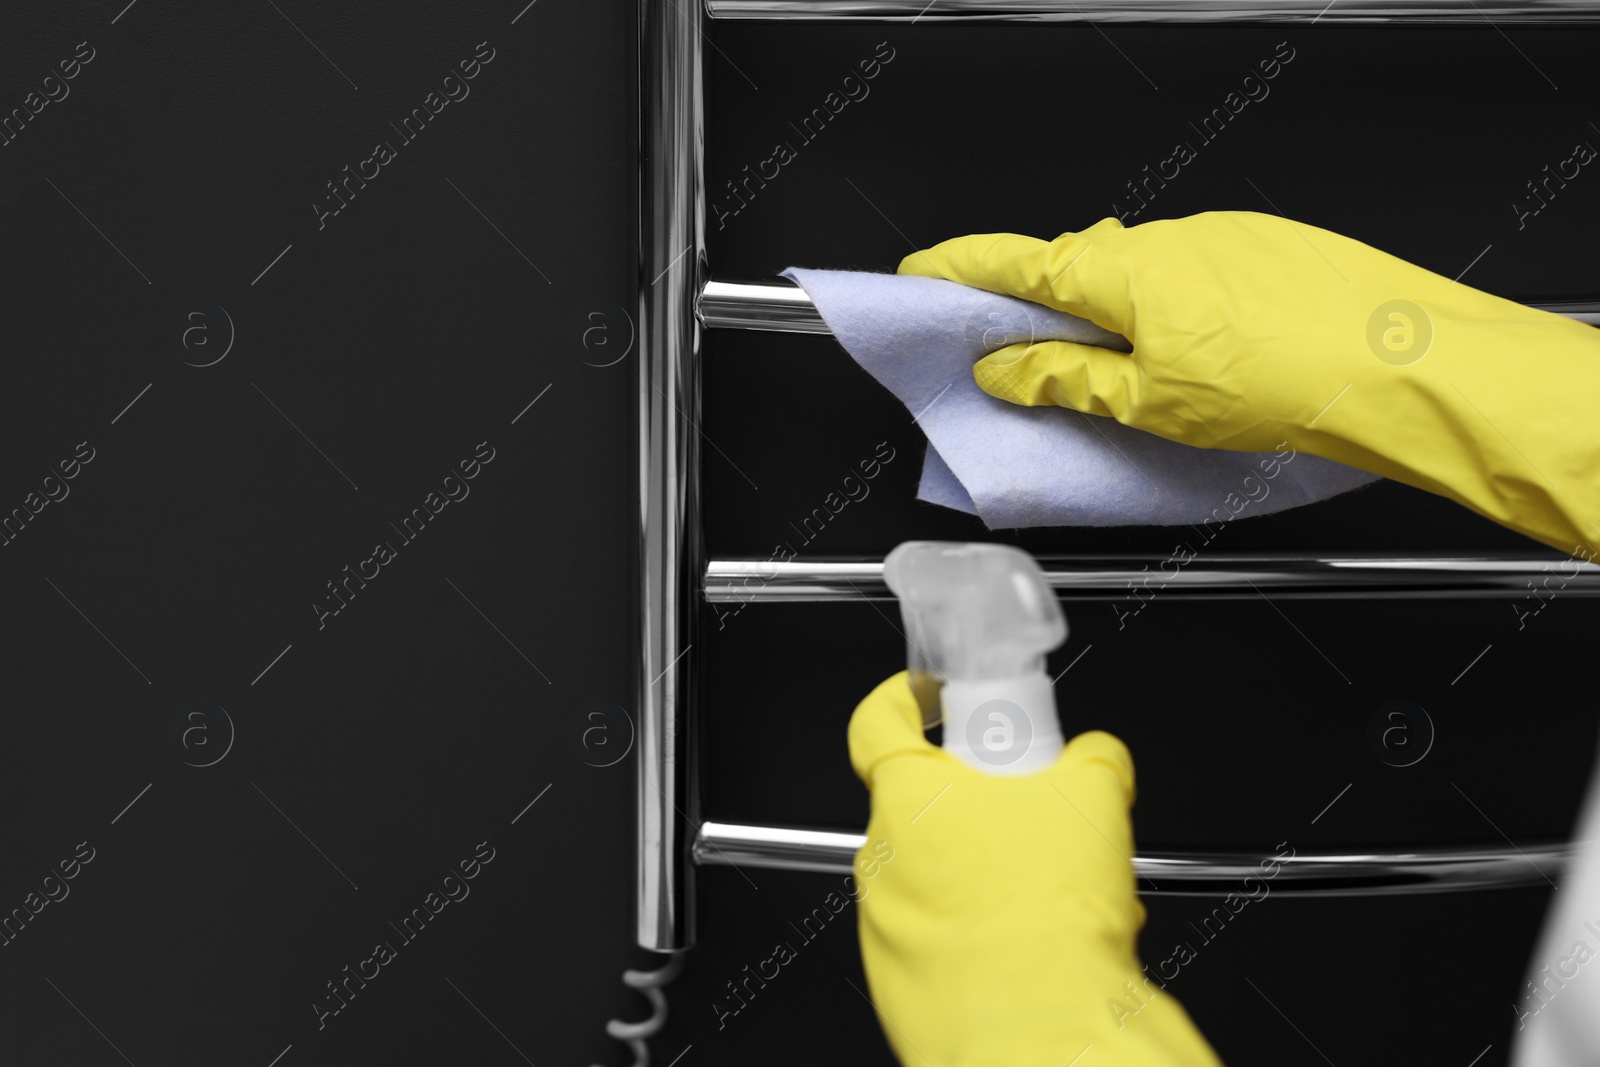 Photo of Woman cleaning heated towel rail with sprayer and rag, closeup